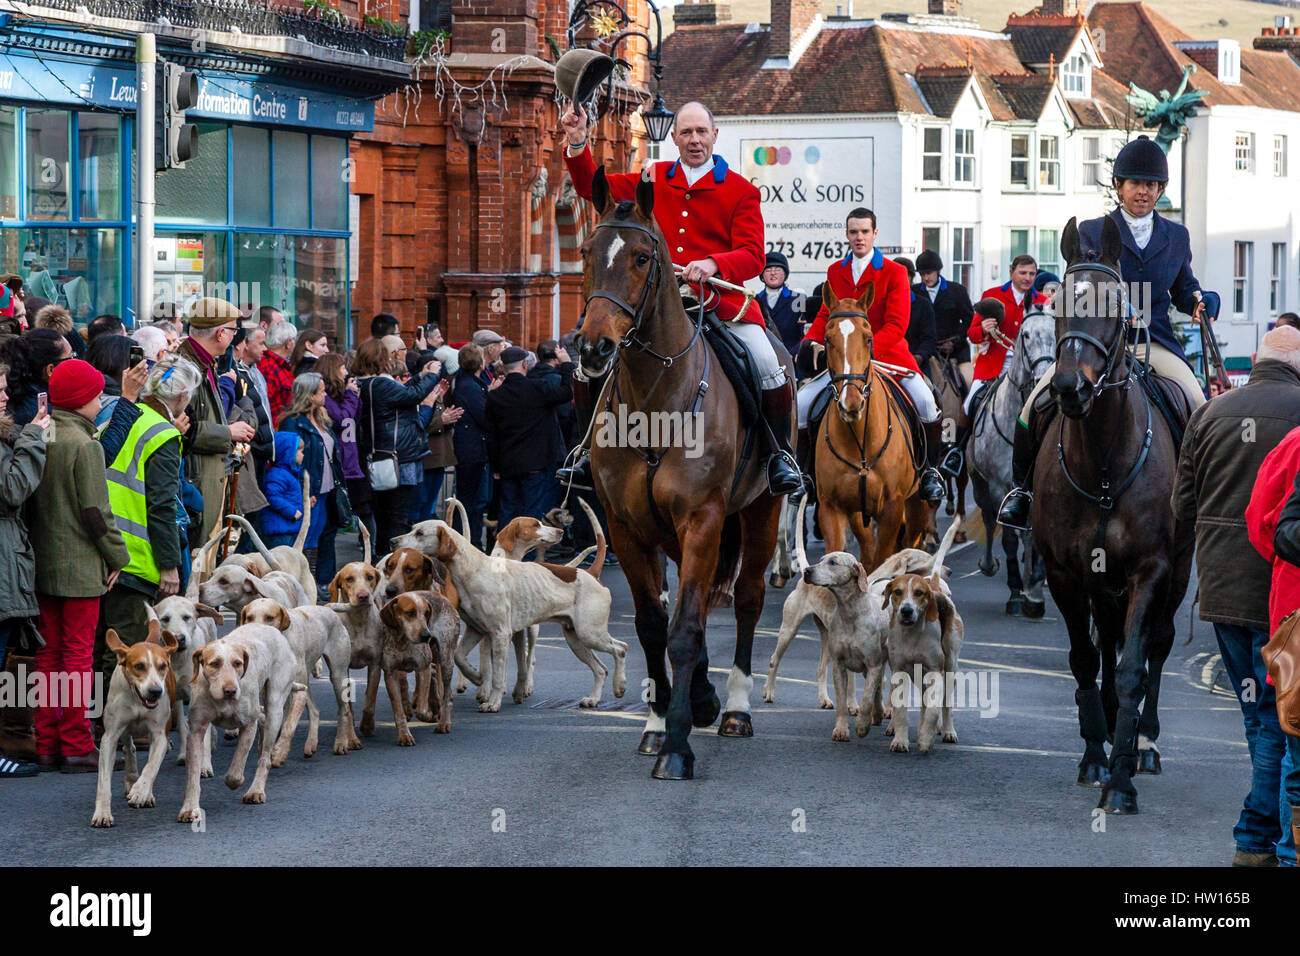 The Southdown and Eridge Hunt Arrive For Their Annual Boxing Day Meeting, High Street, Lewes, East Sussex, UK Stock Photo